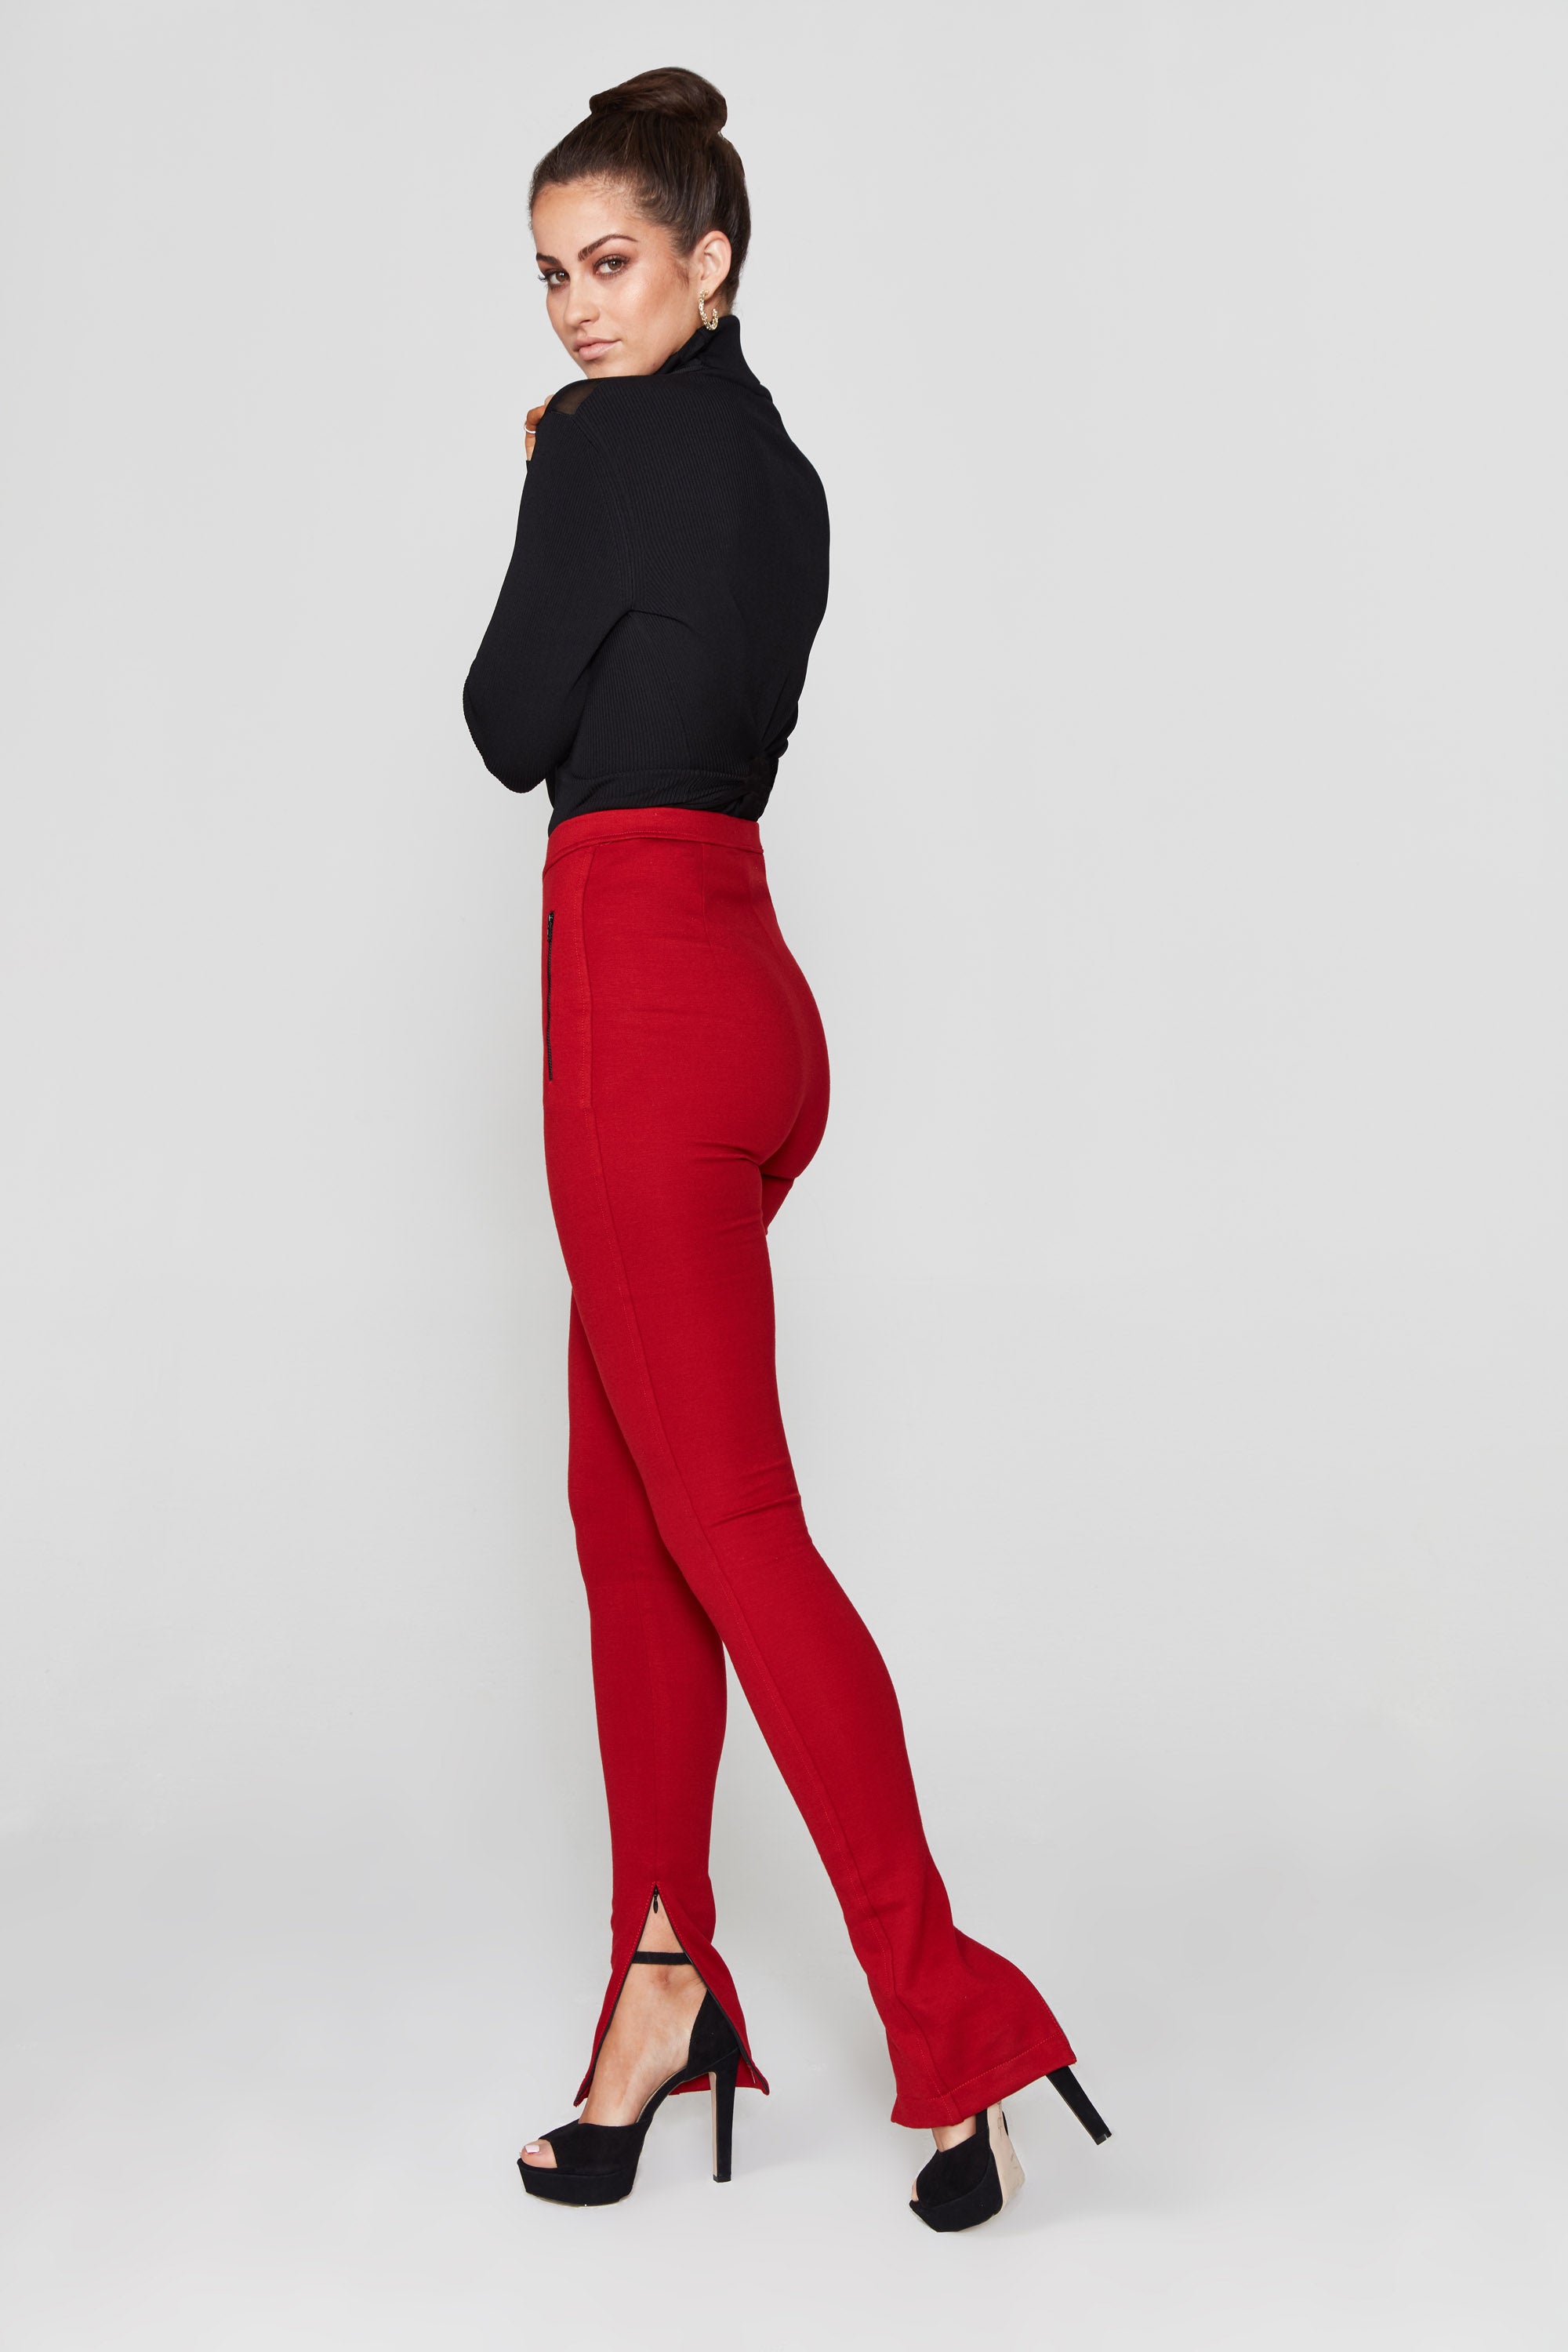 Chanel Pant - Chili Pepper | The Sixes - THE SIXES